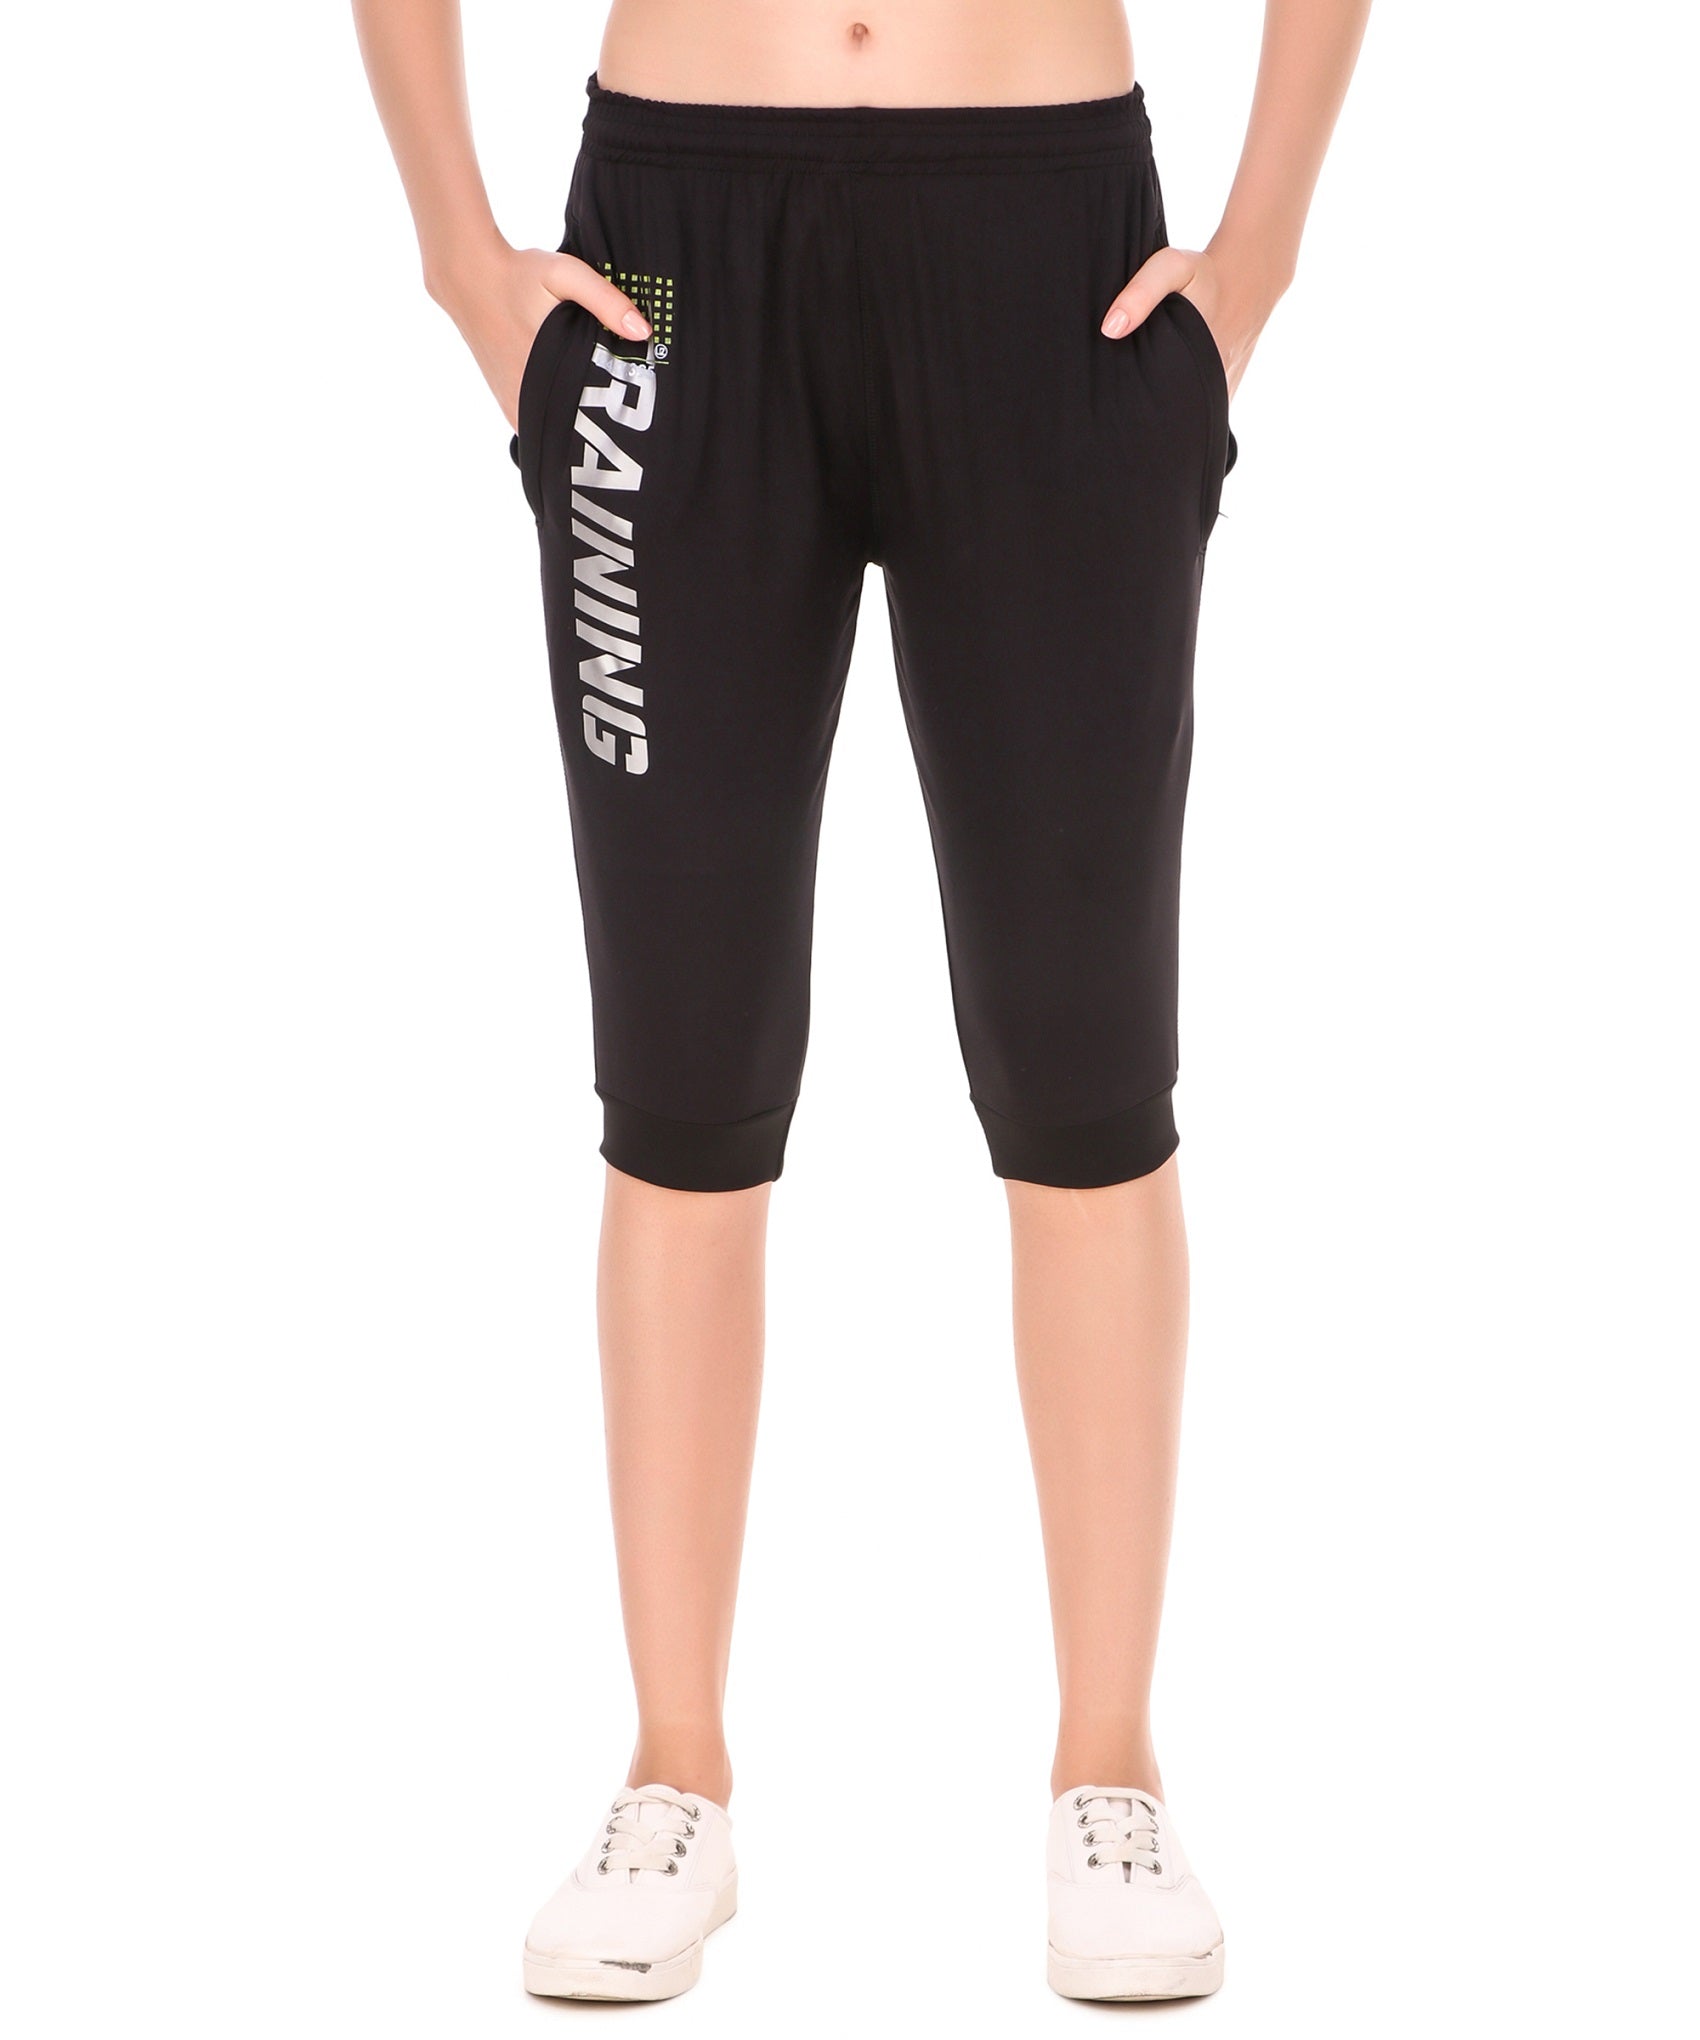 Women's Stretchable Lycra 3/4th Capri with 2 Zippered Pockets for Gym, Yoga, Workout and Casual Wear